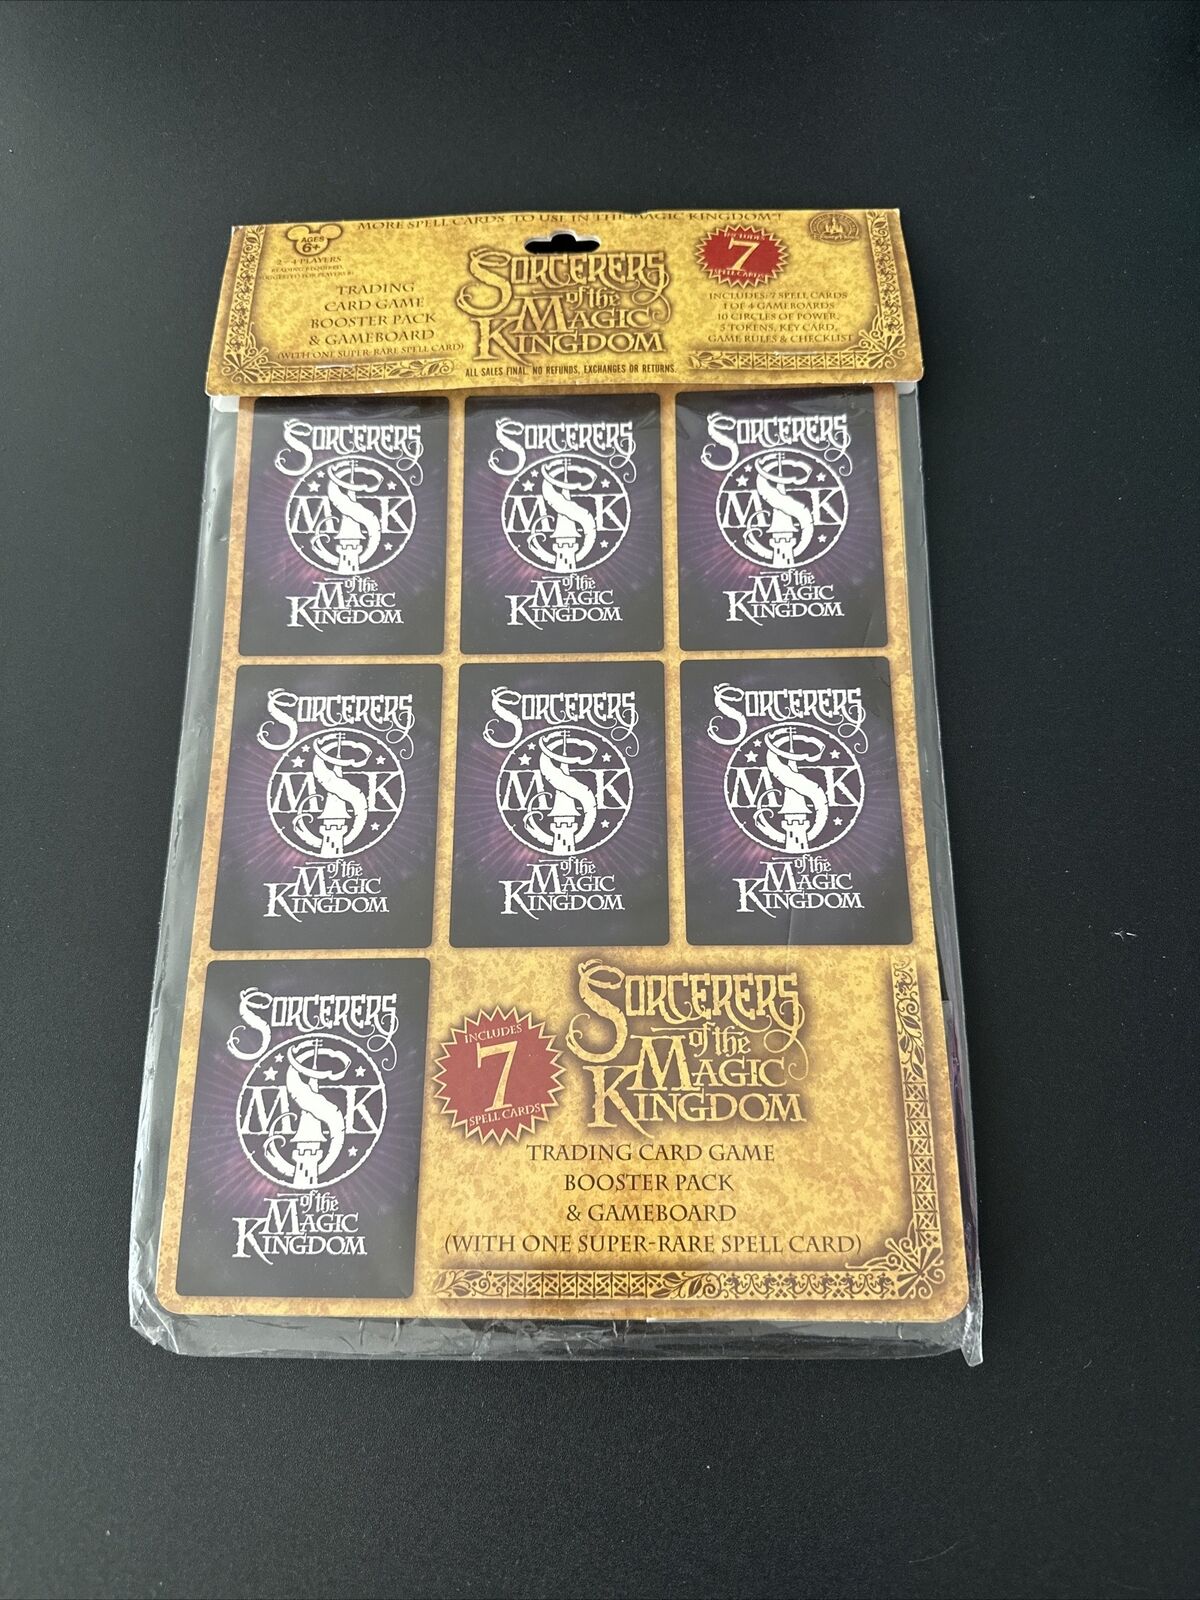 Disney Sorcerers Of The Magic Kingdom Trading Card Game Booster Pack & Gameboard